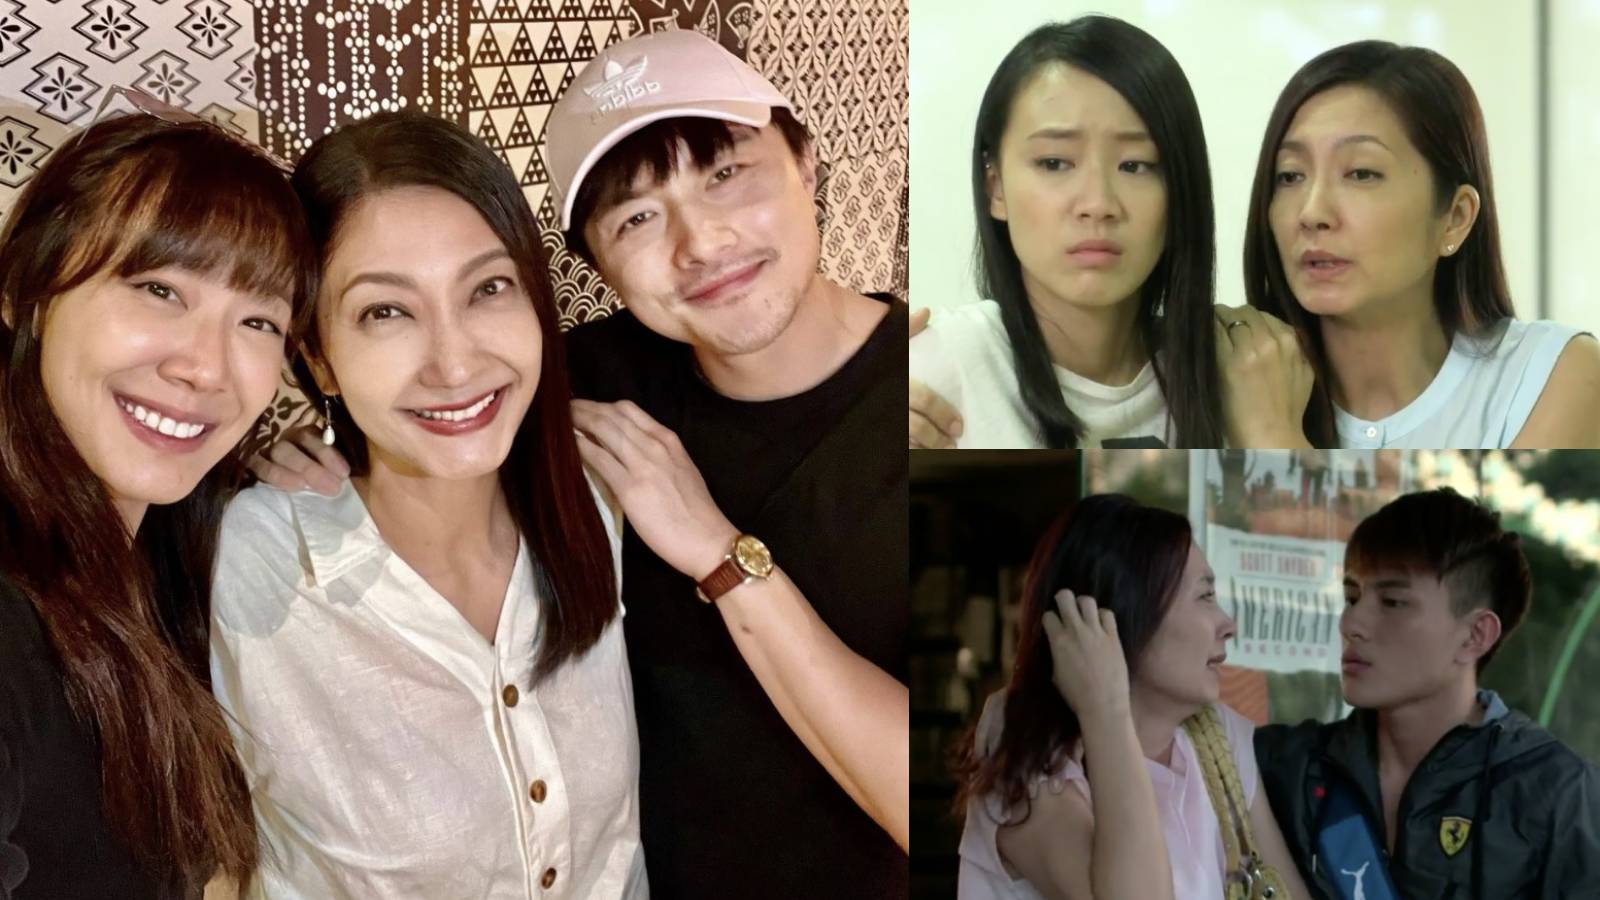  Huang Biren Says Julie Tan And Shane Pow, Who Played Her Kids In 2014 Mediacorp Drama Three Wishes, Still Call Her “Mummy” Now